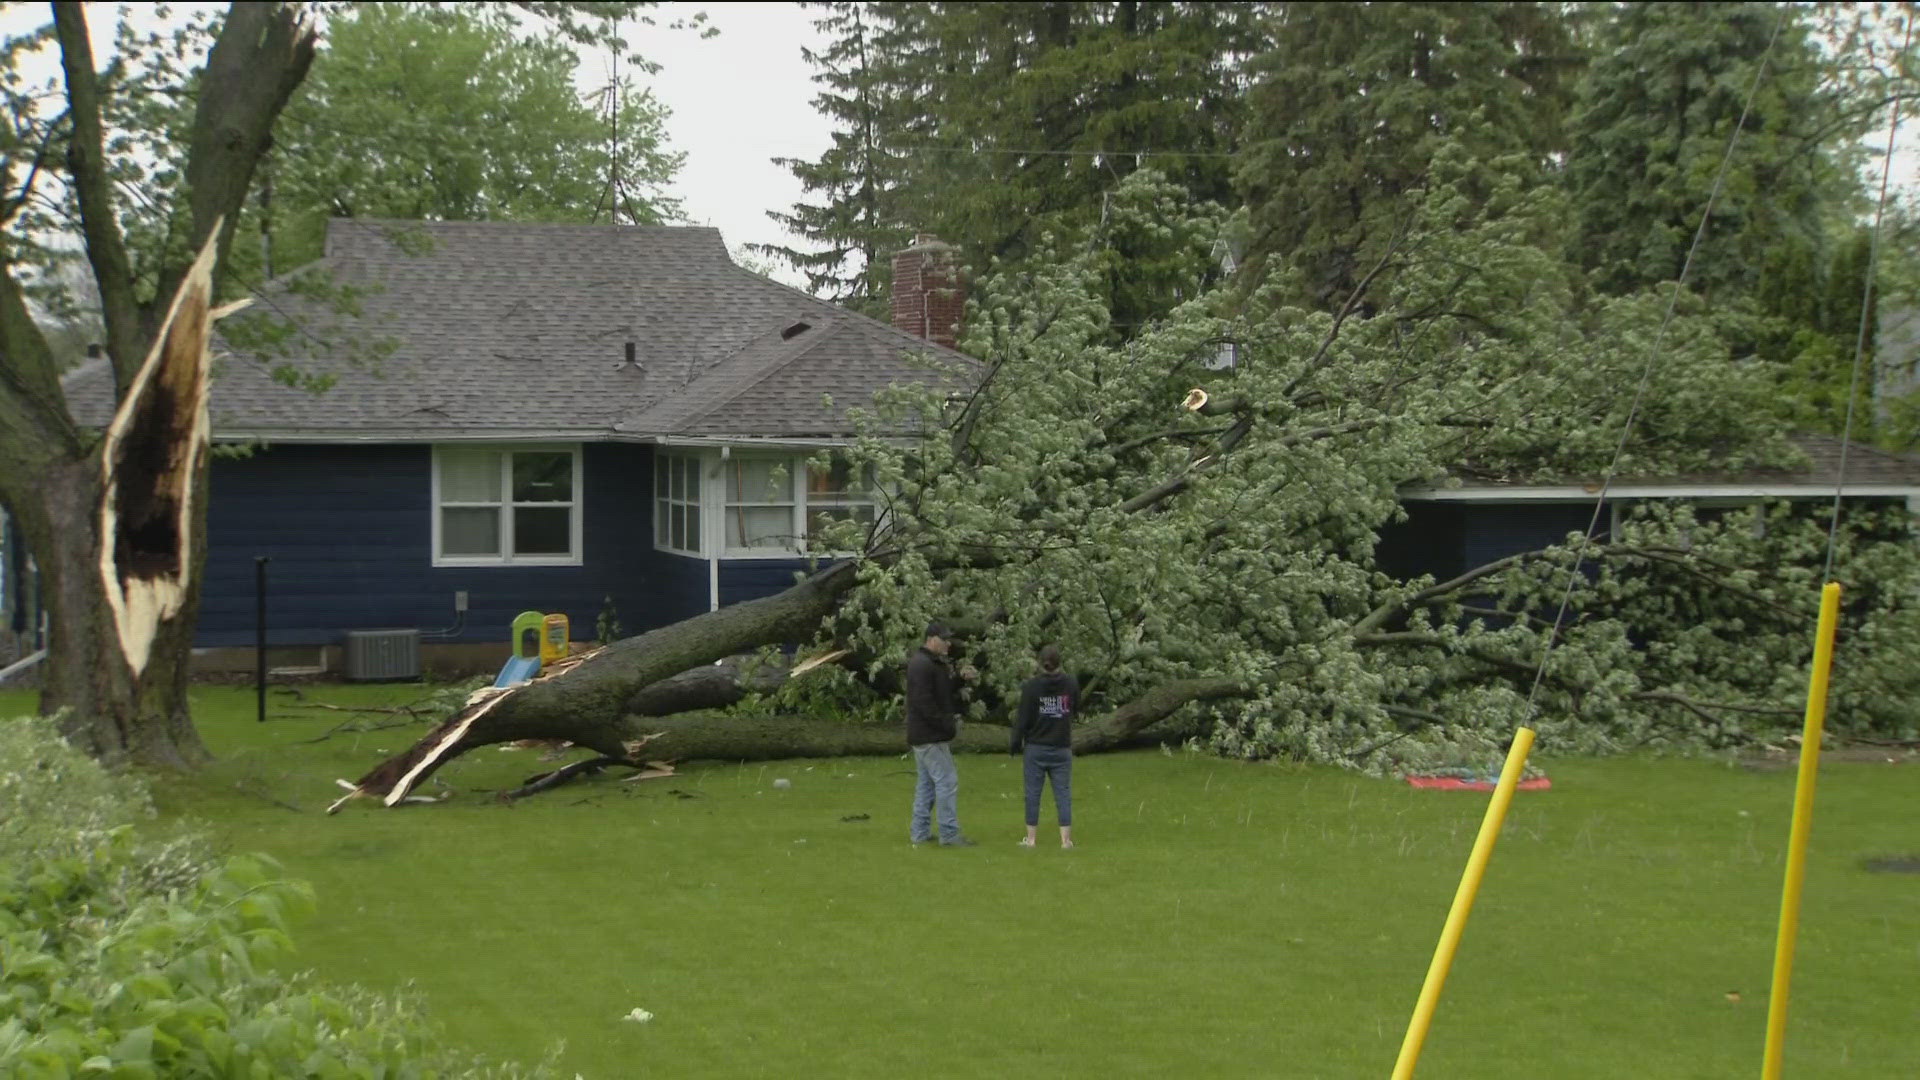 The tornado was reported in Fairmont. Strong winds also felled a large tree in Zumbrota.